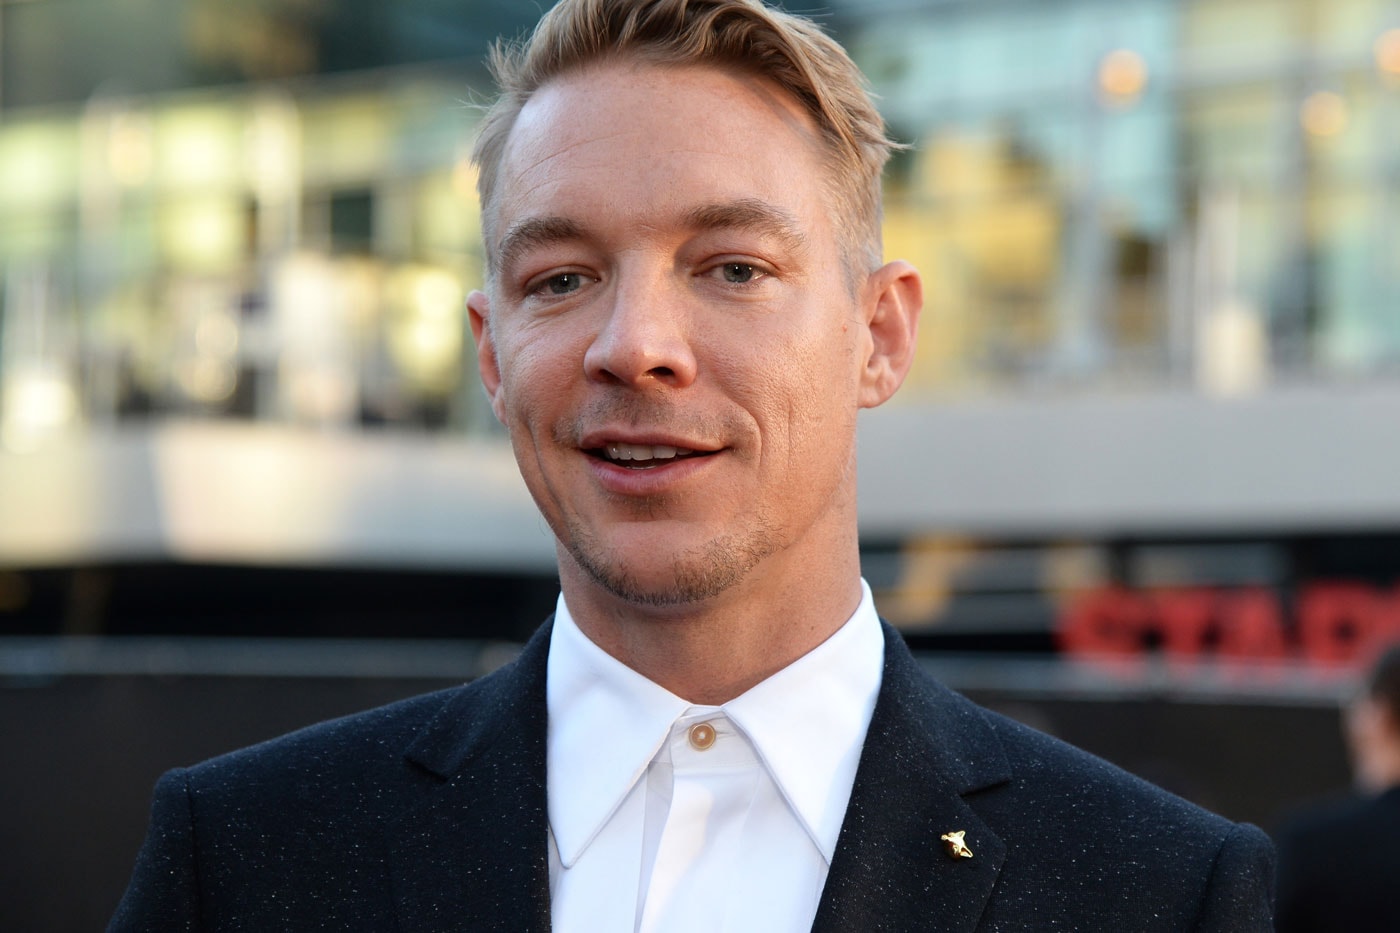 Diplo and Eric Prydz to Receive Their Own Beats 1 Radio Shows